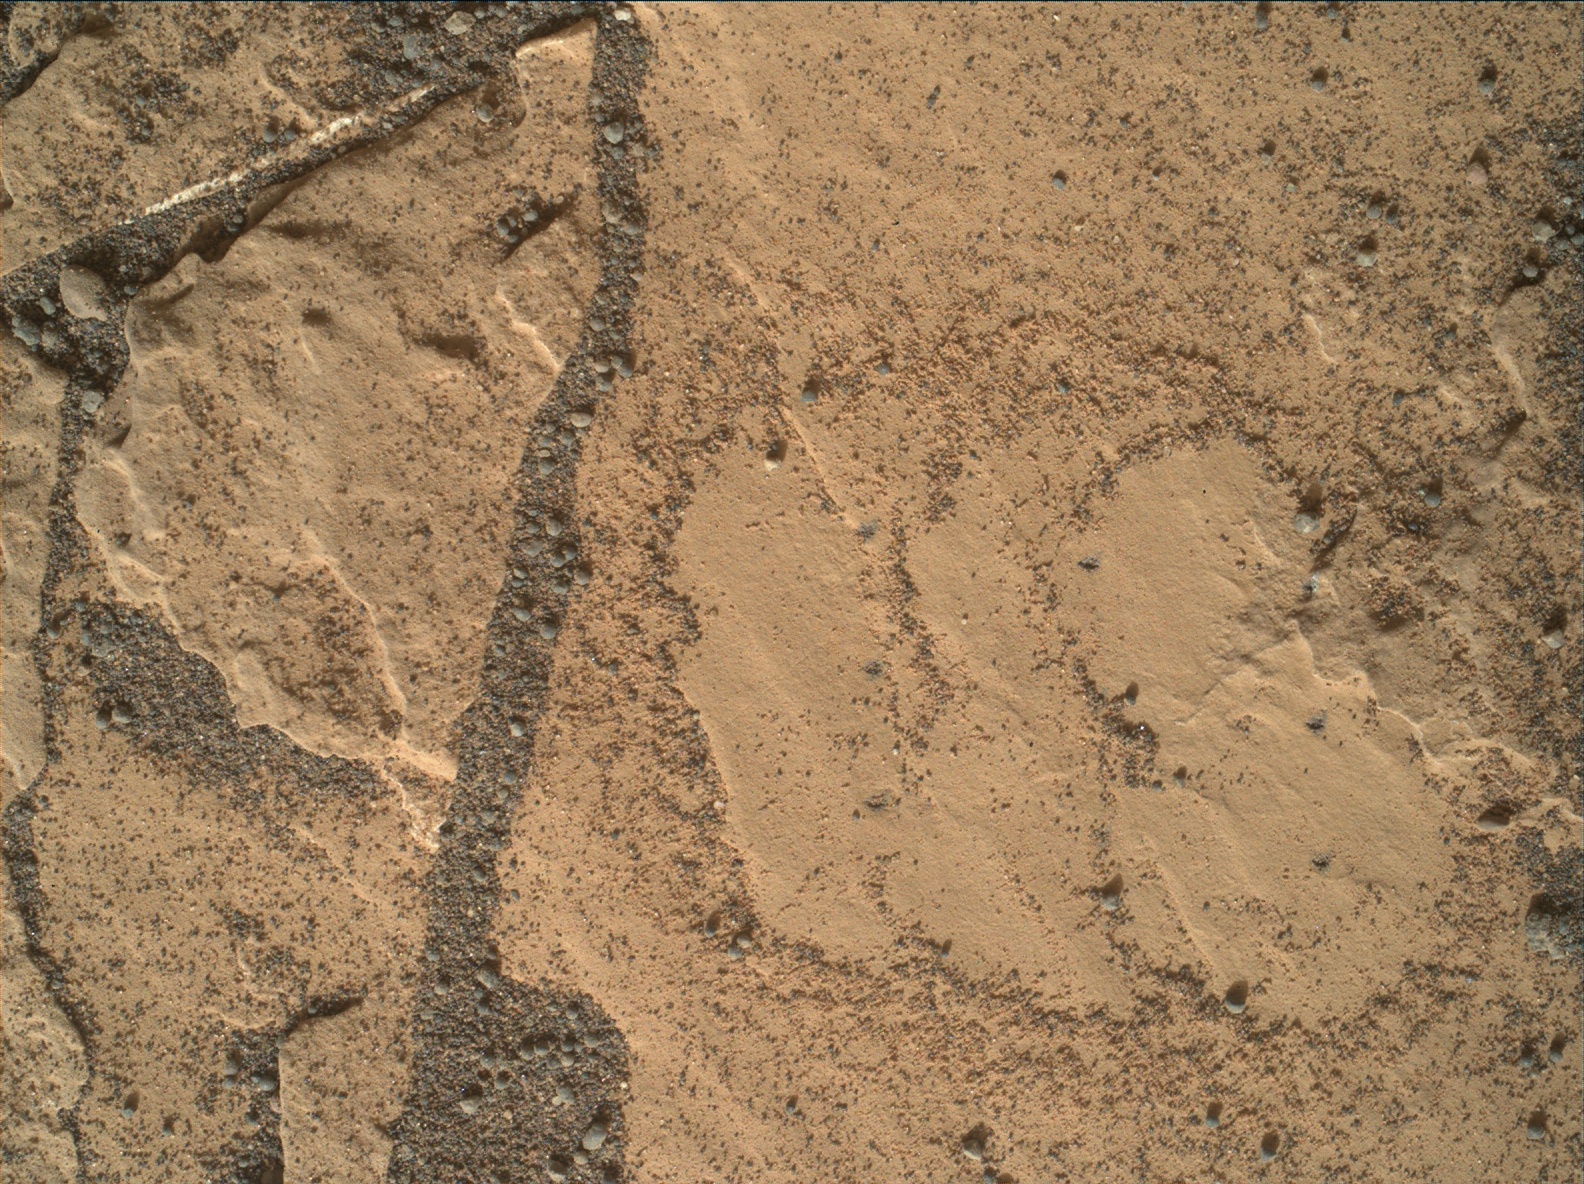 Nasa's Mars rover Curiosity acquired this image using its Mars Hand Lens Imager (MAHLI) on Sol 1716